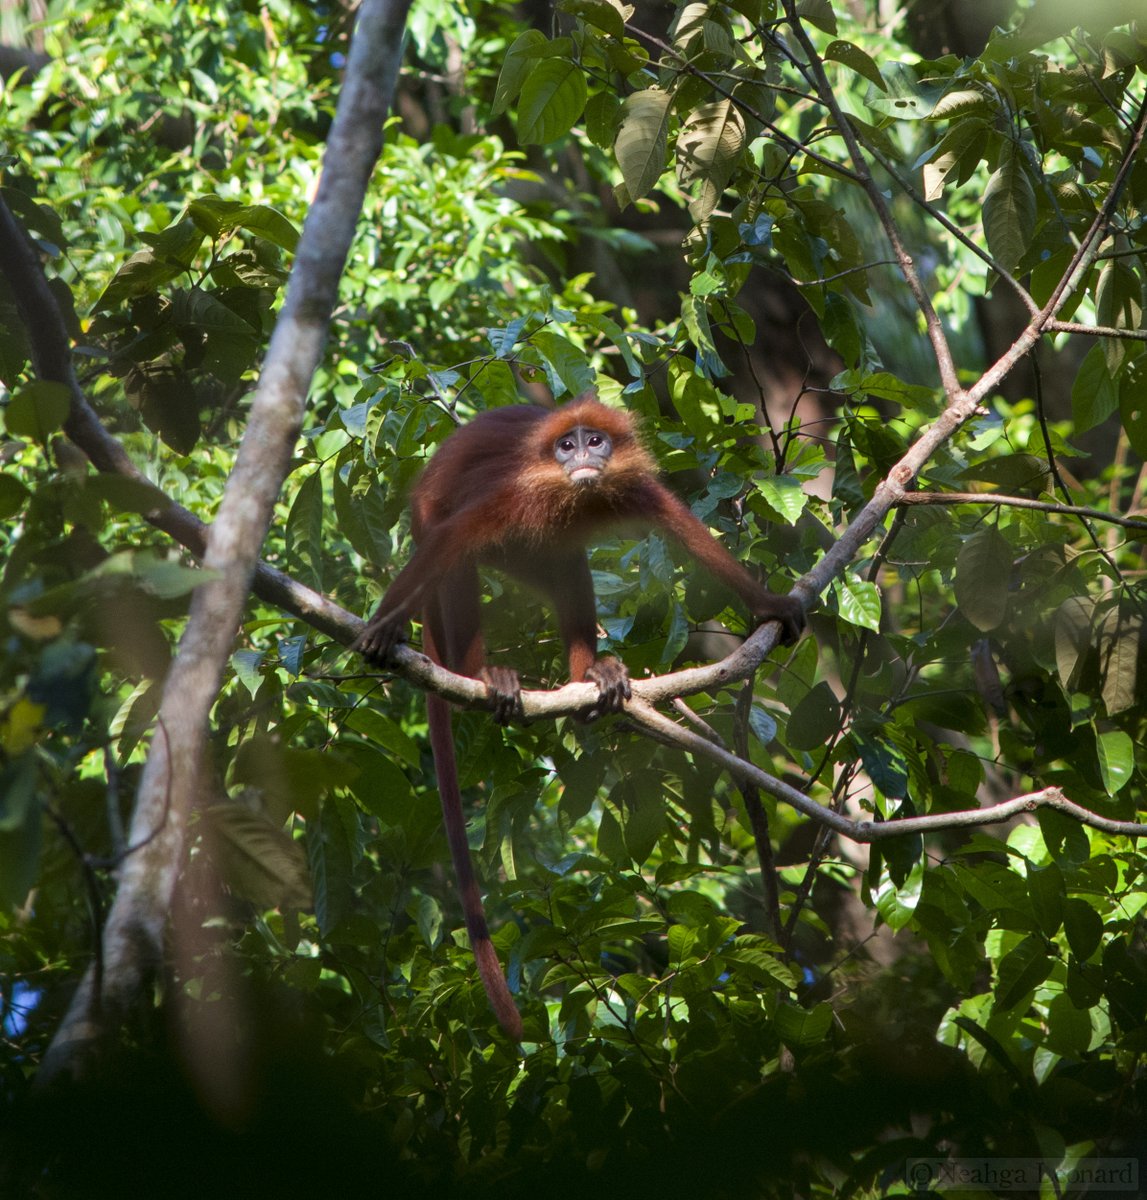 The red leaf monkey, or maroon leaf monkey, thrives in the jungles of Borneo. While their numbers are steady, their habitat is at risk due to deforestation, preserving rainforests is vital! 🌿🐒 #Conservation #Borneo